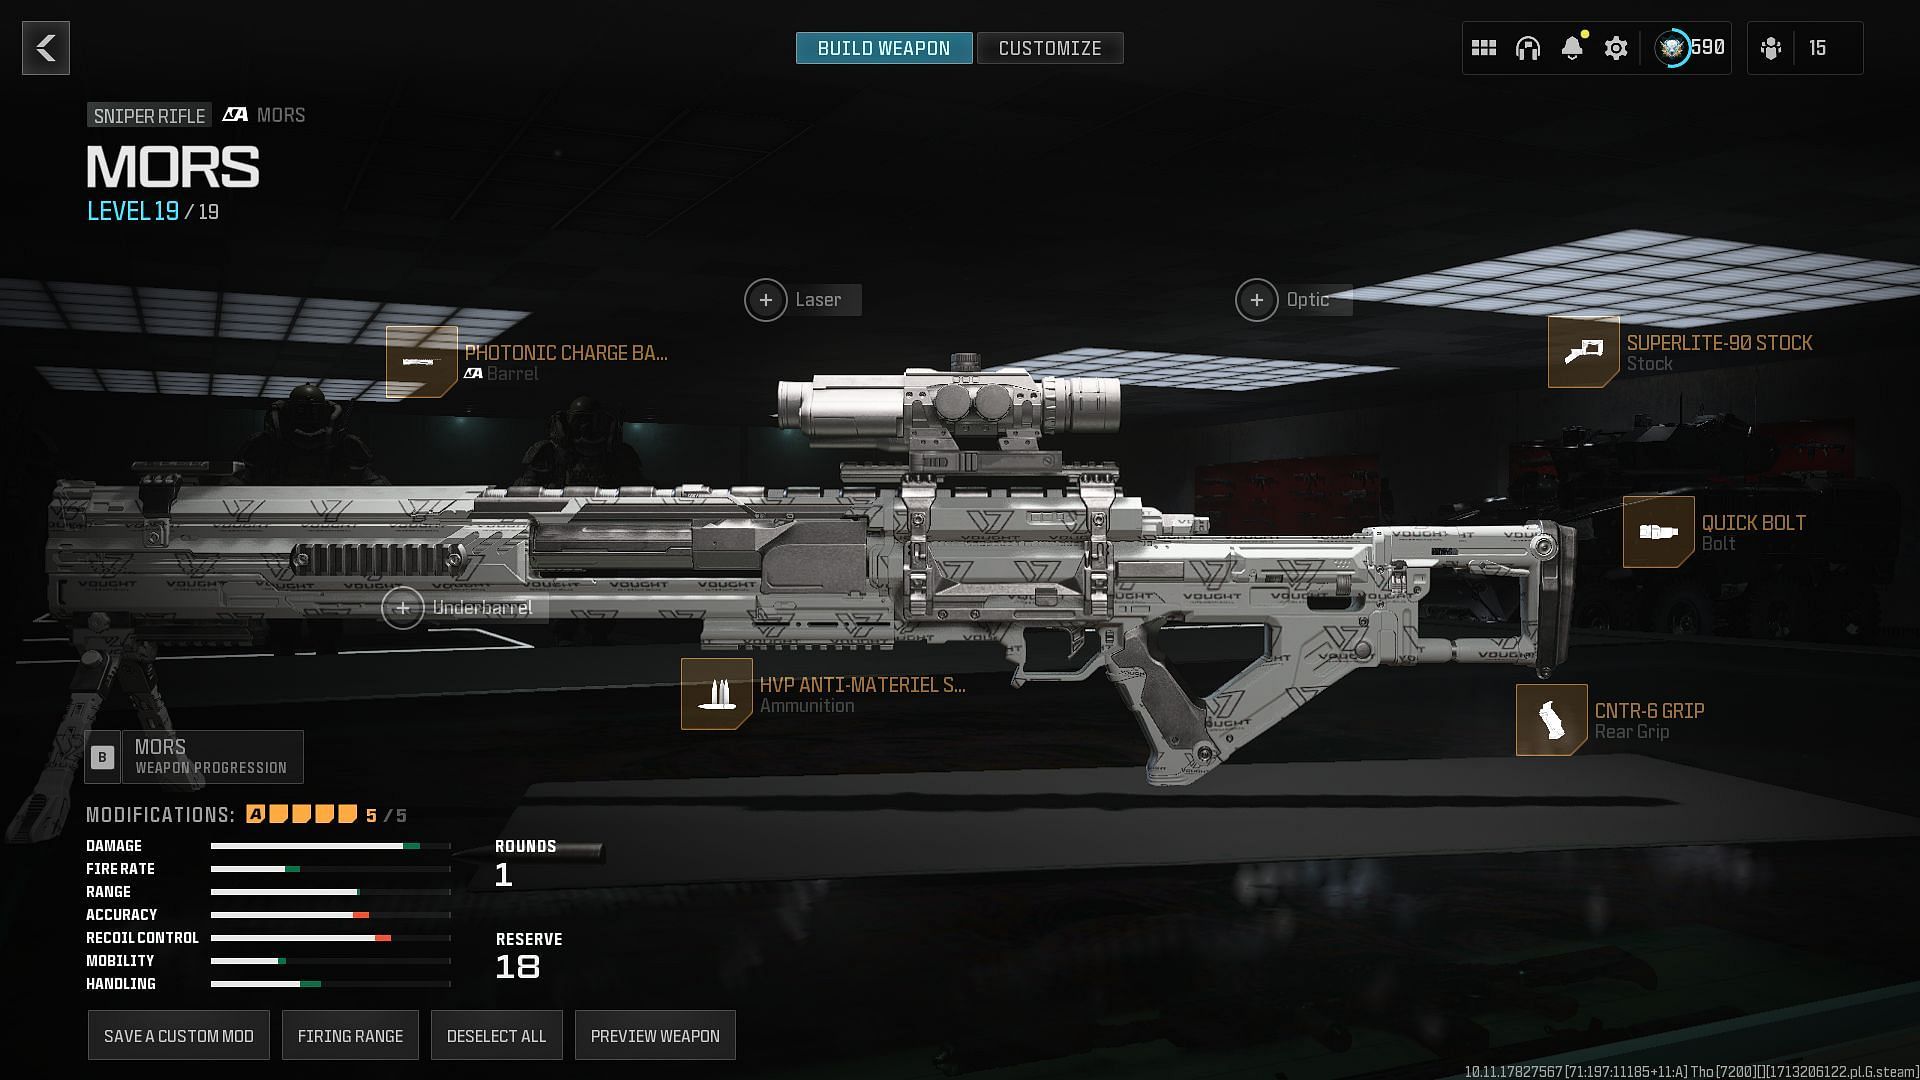 Best one shot Sniper Rifle loadout in Warzone Season 3 using the MORS (Image via Activision)